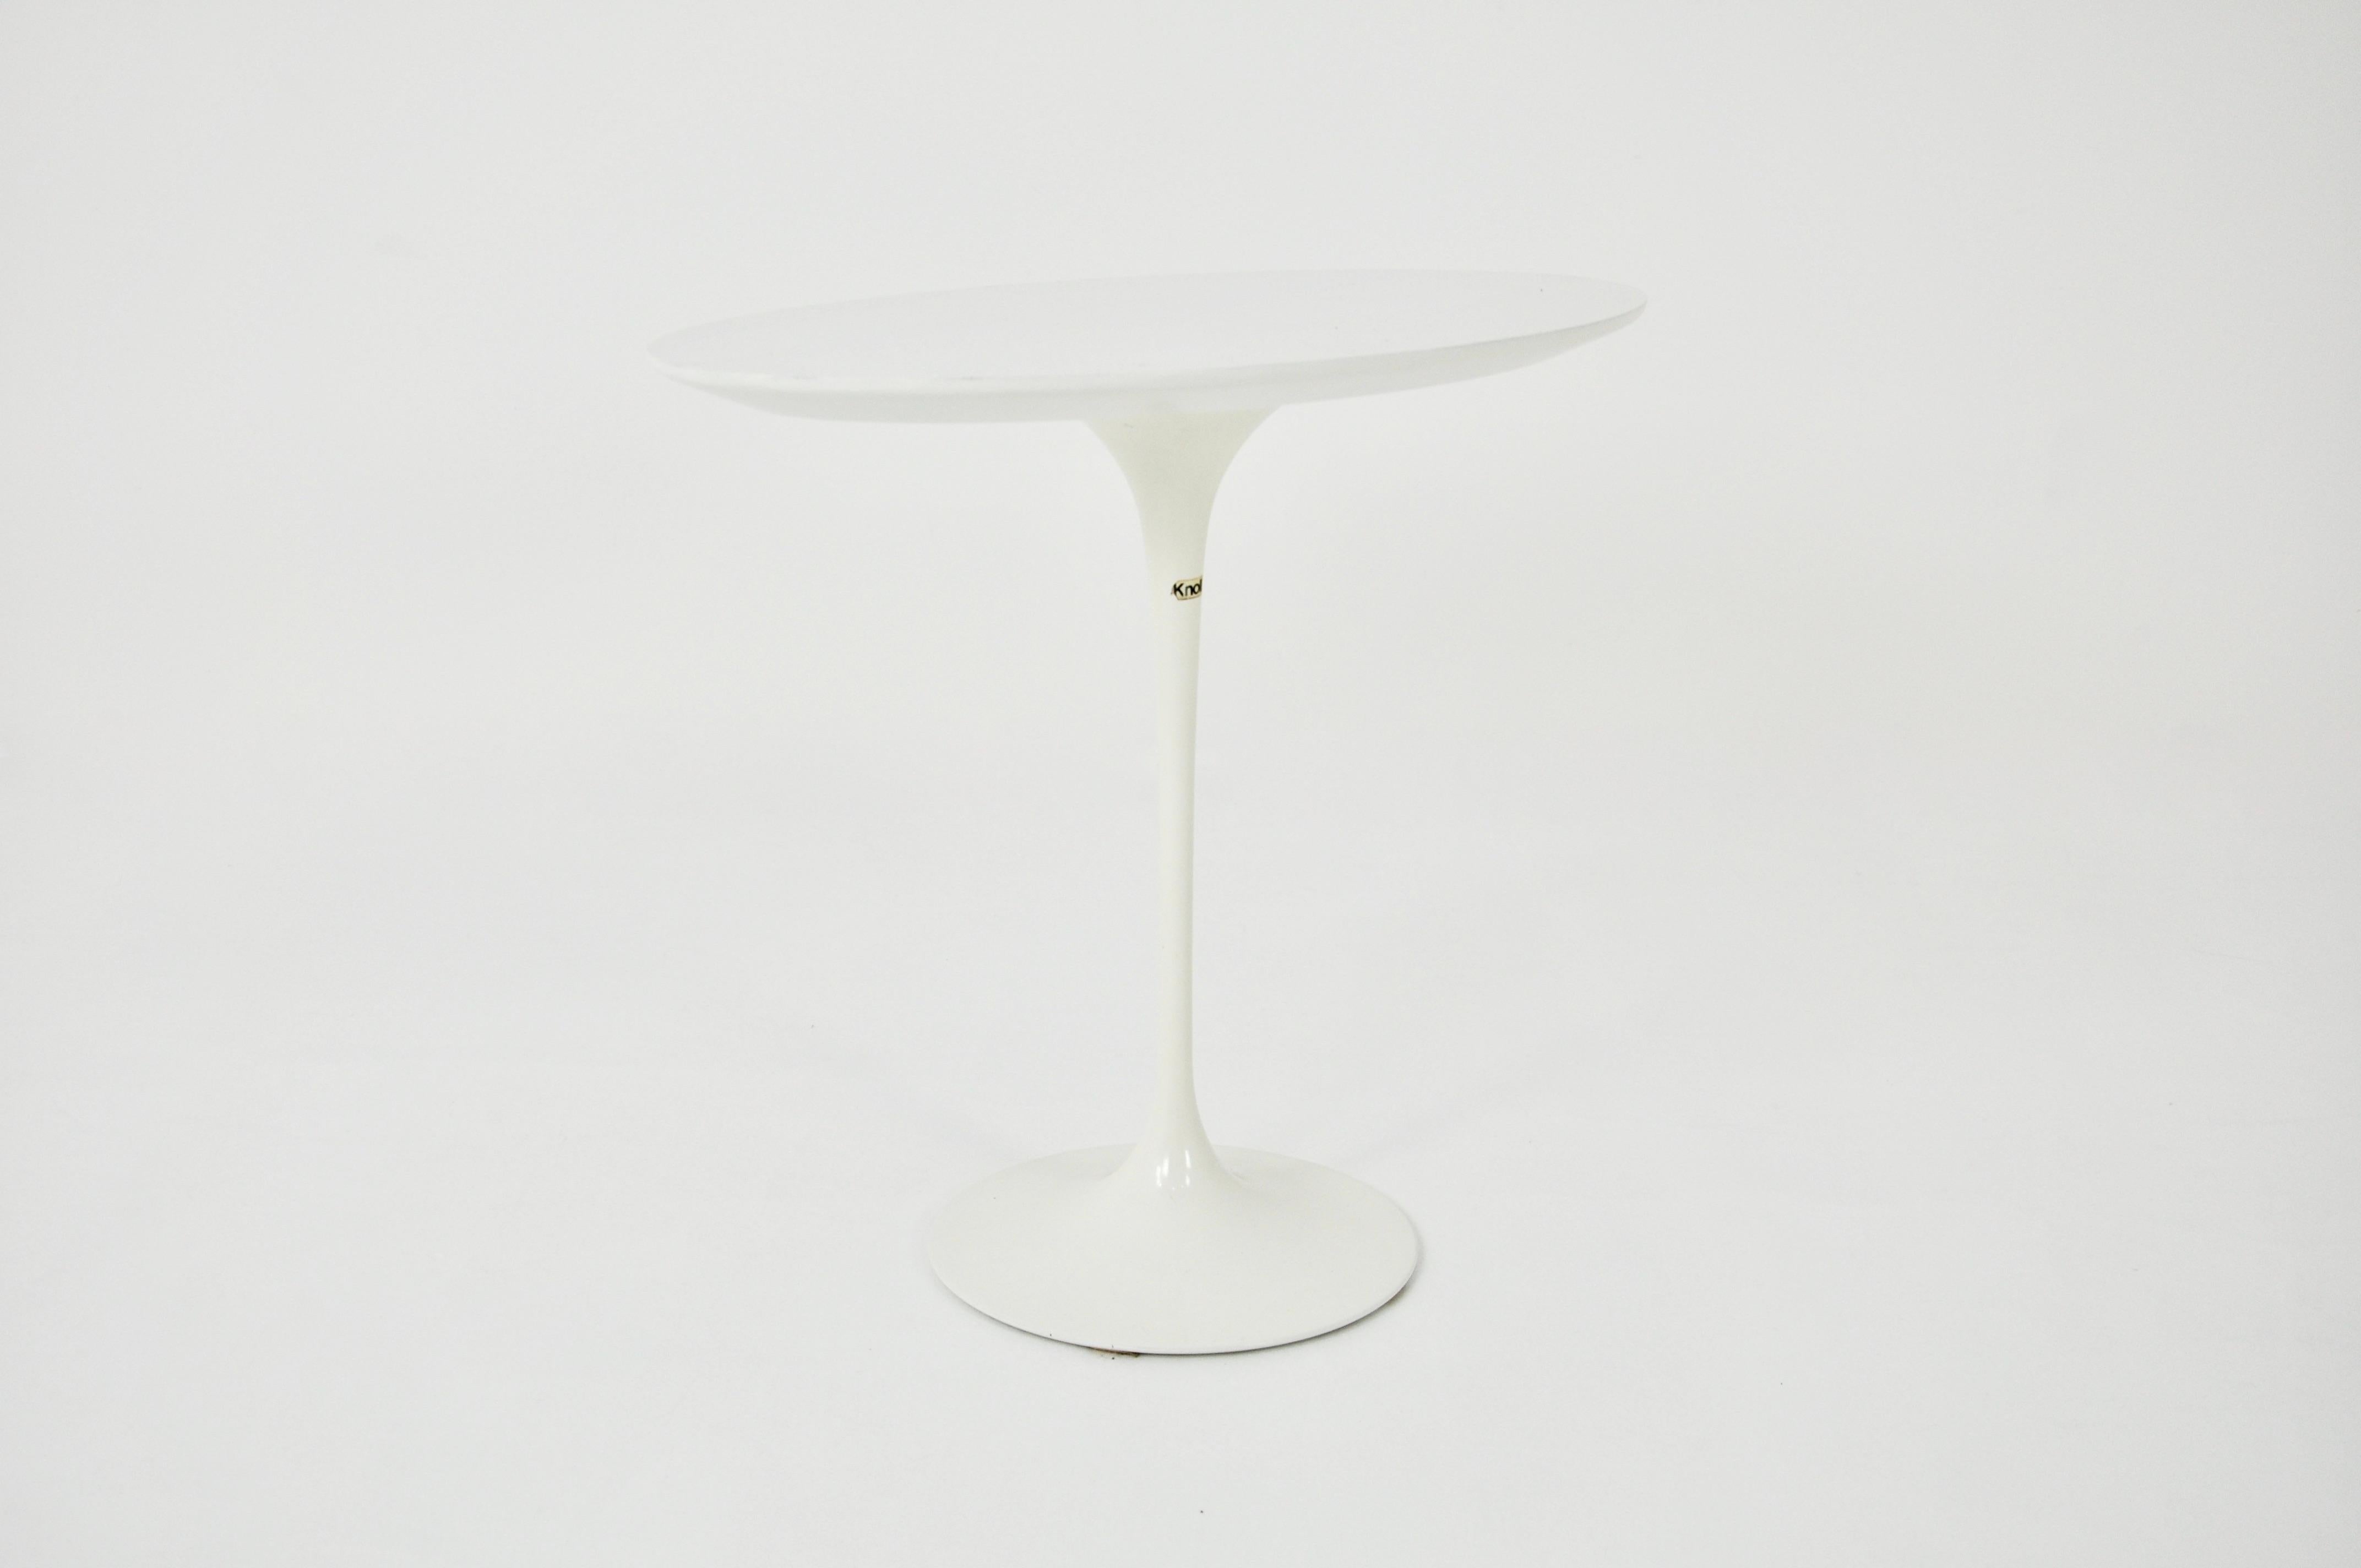 Oval side table designed by Eero Saarinen and produced by Knoll International in the 1960s. Stamped Knoll International. Wear due to time and age of the table.